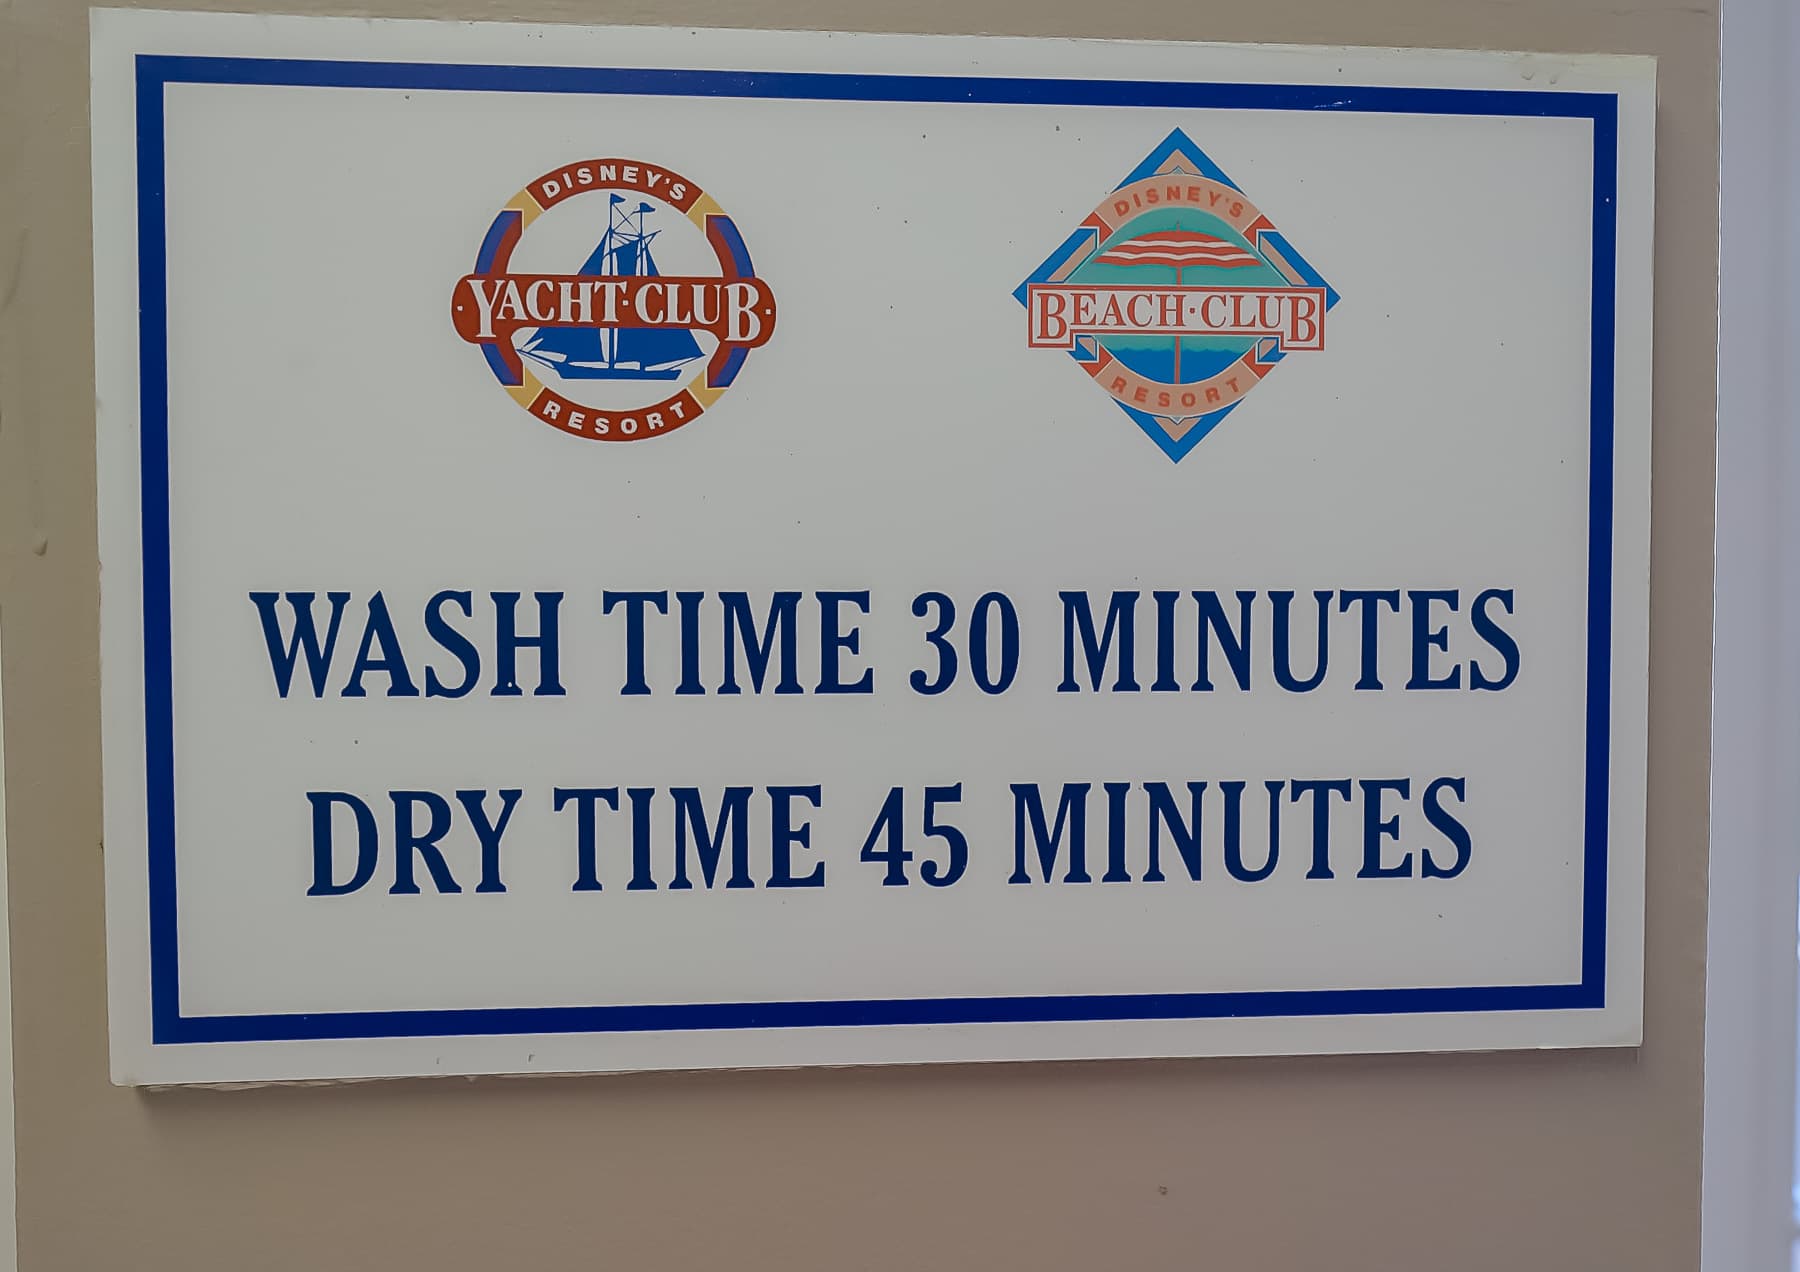 A sign that indicates the wash time is 30 minutes and the dry time is 45 minutes.